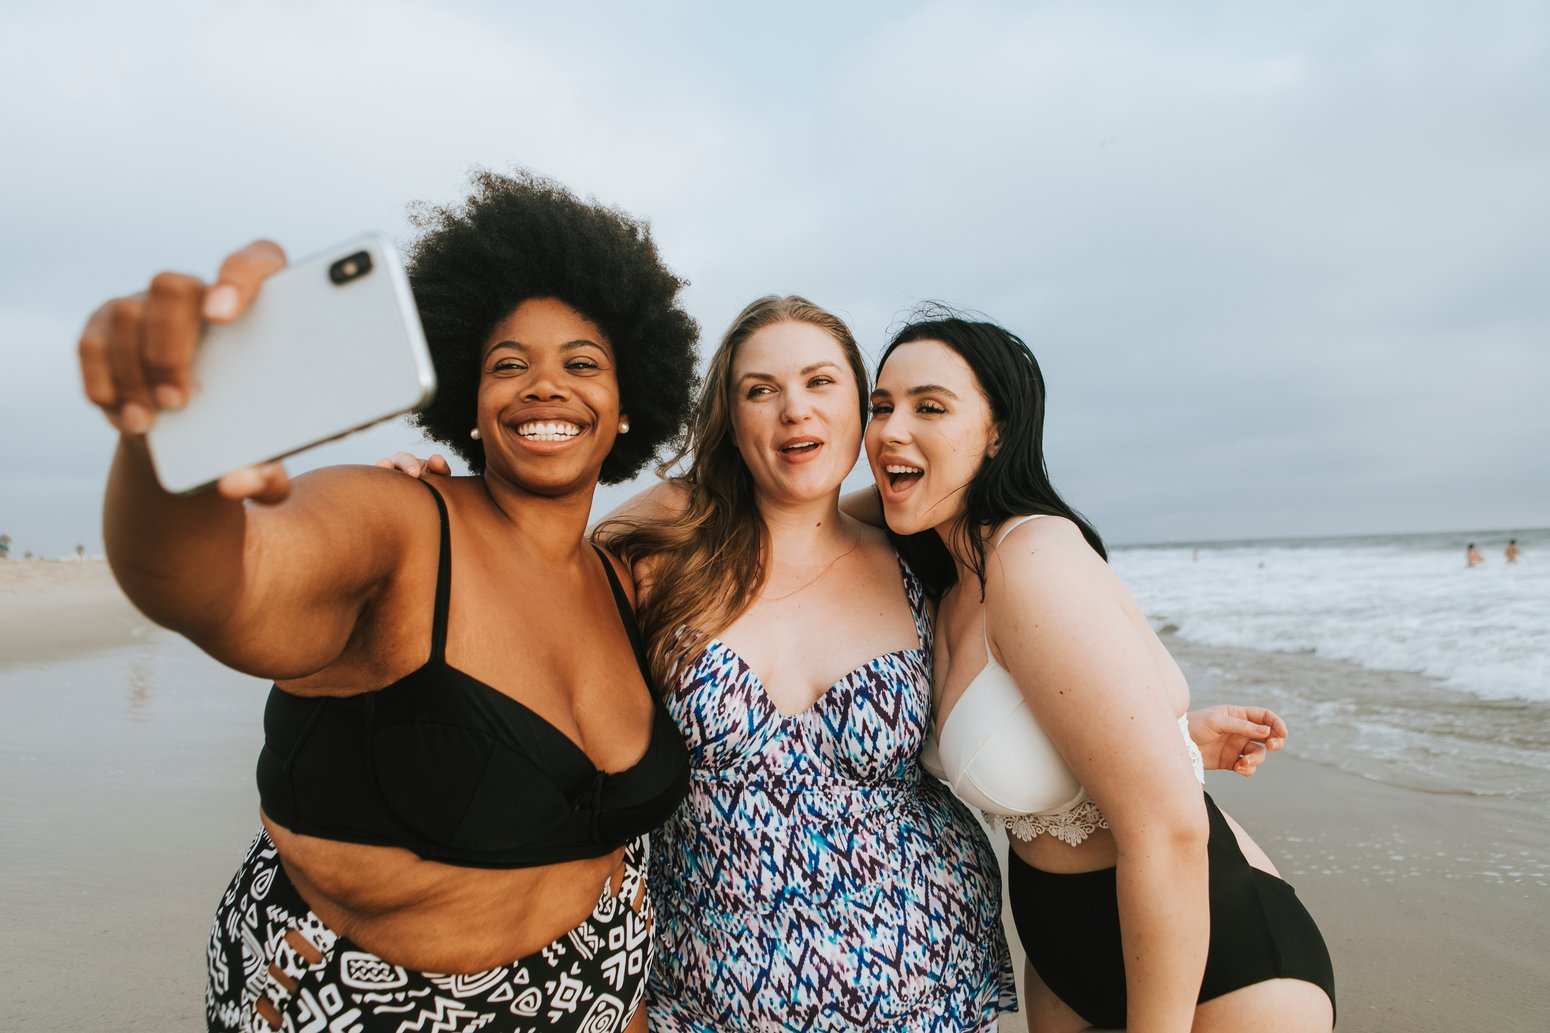 three happy women in bathing suits taking a selfie on the beach and not worried about body image issues